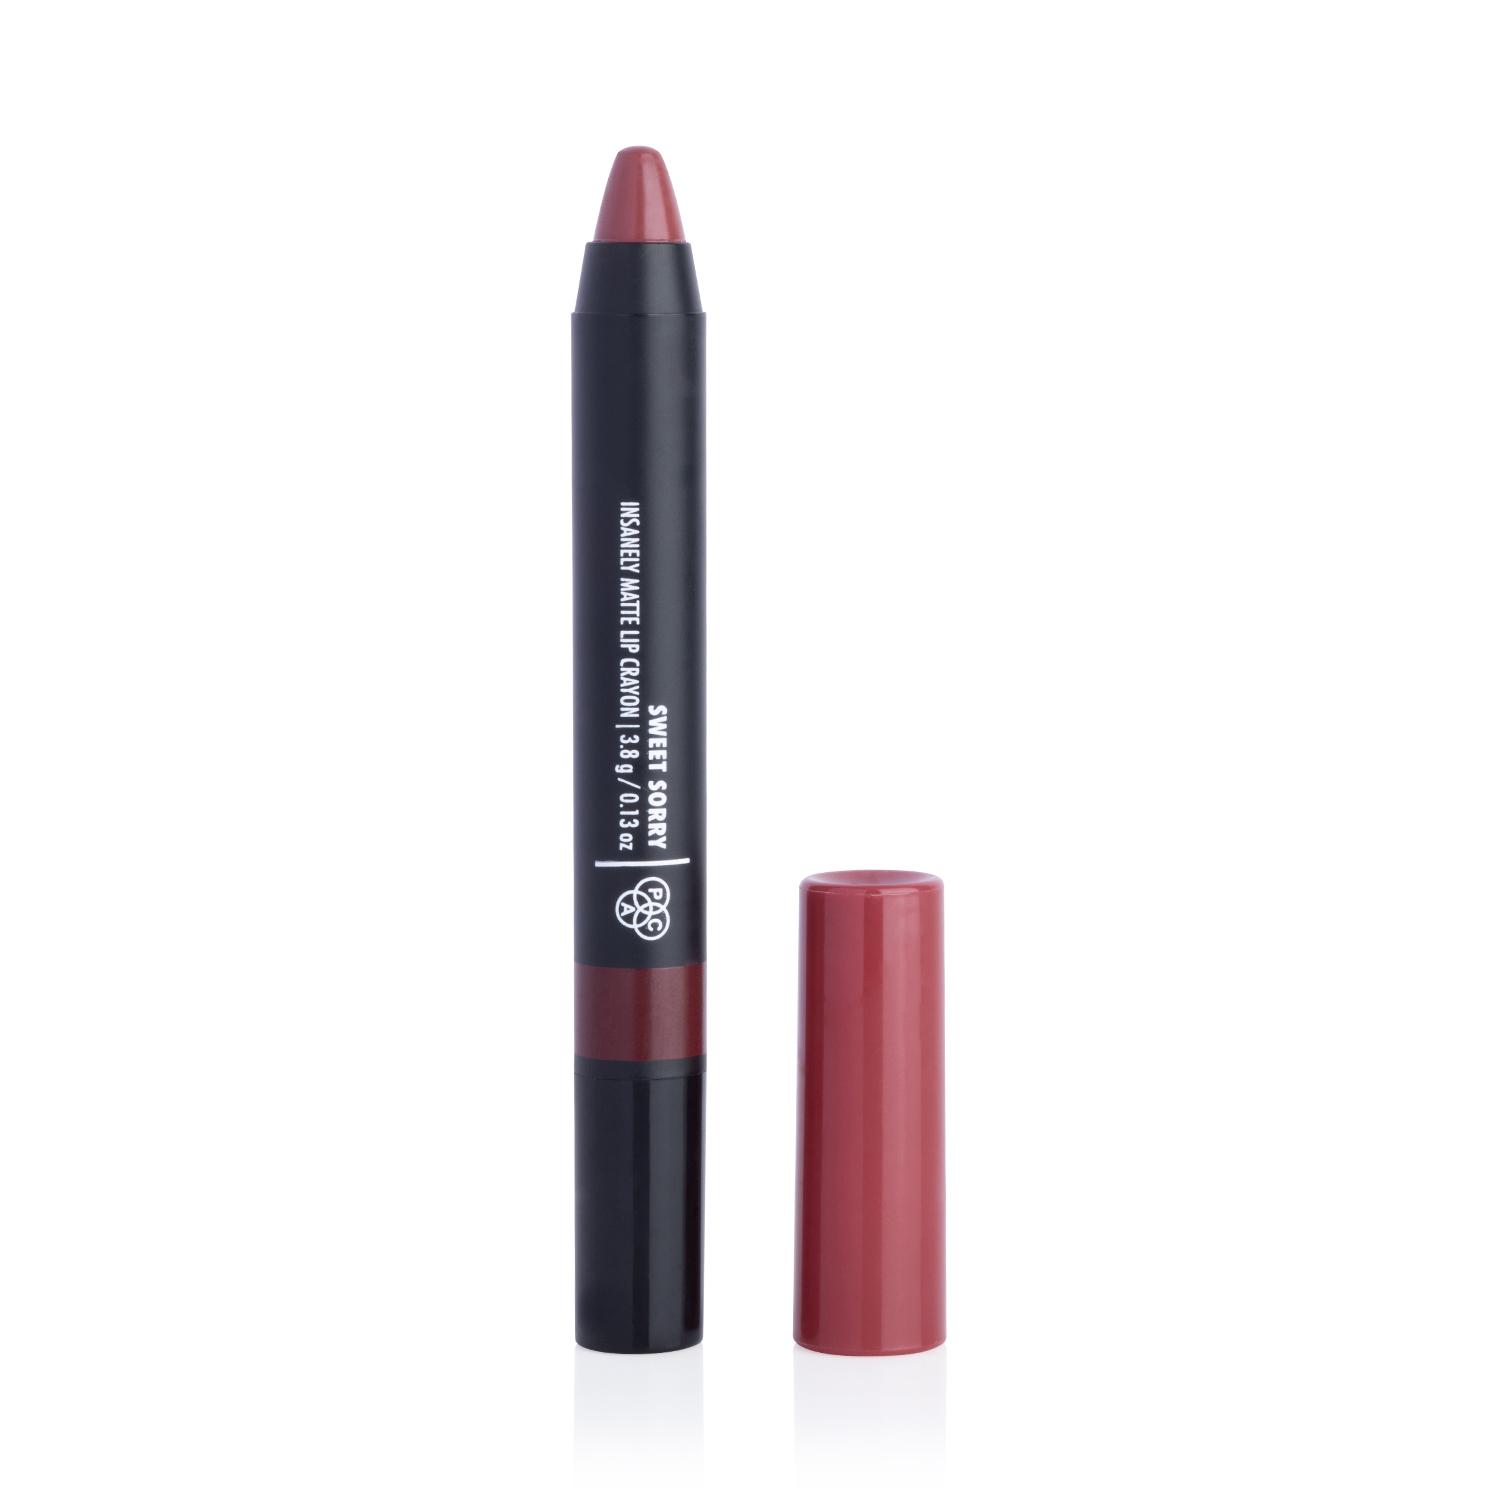 PAC | PAC Insanely Matte Lip Crayon - Sweet Sorry (3.8g)